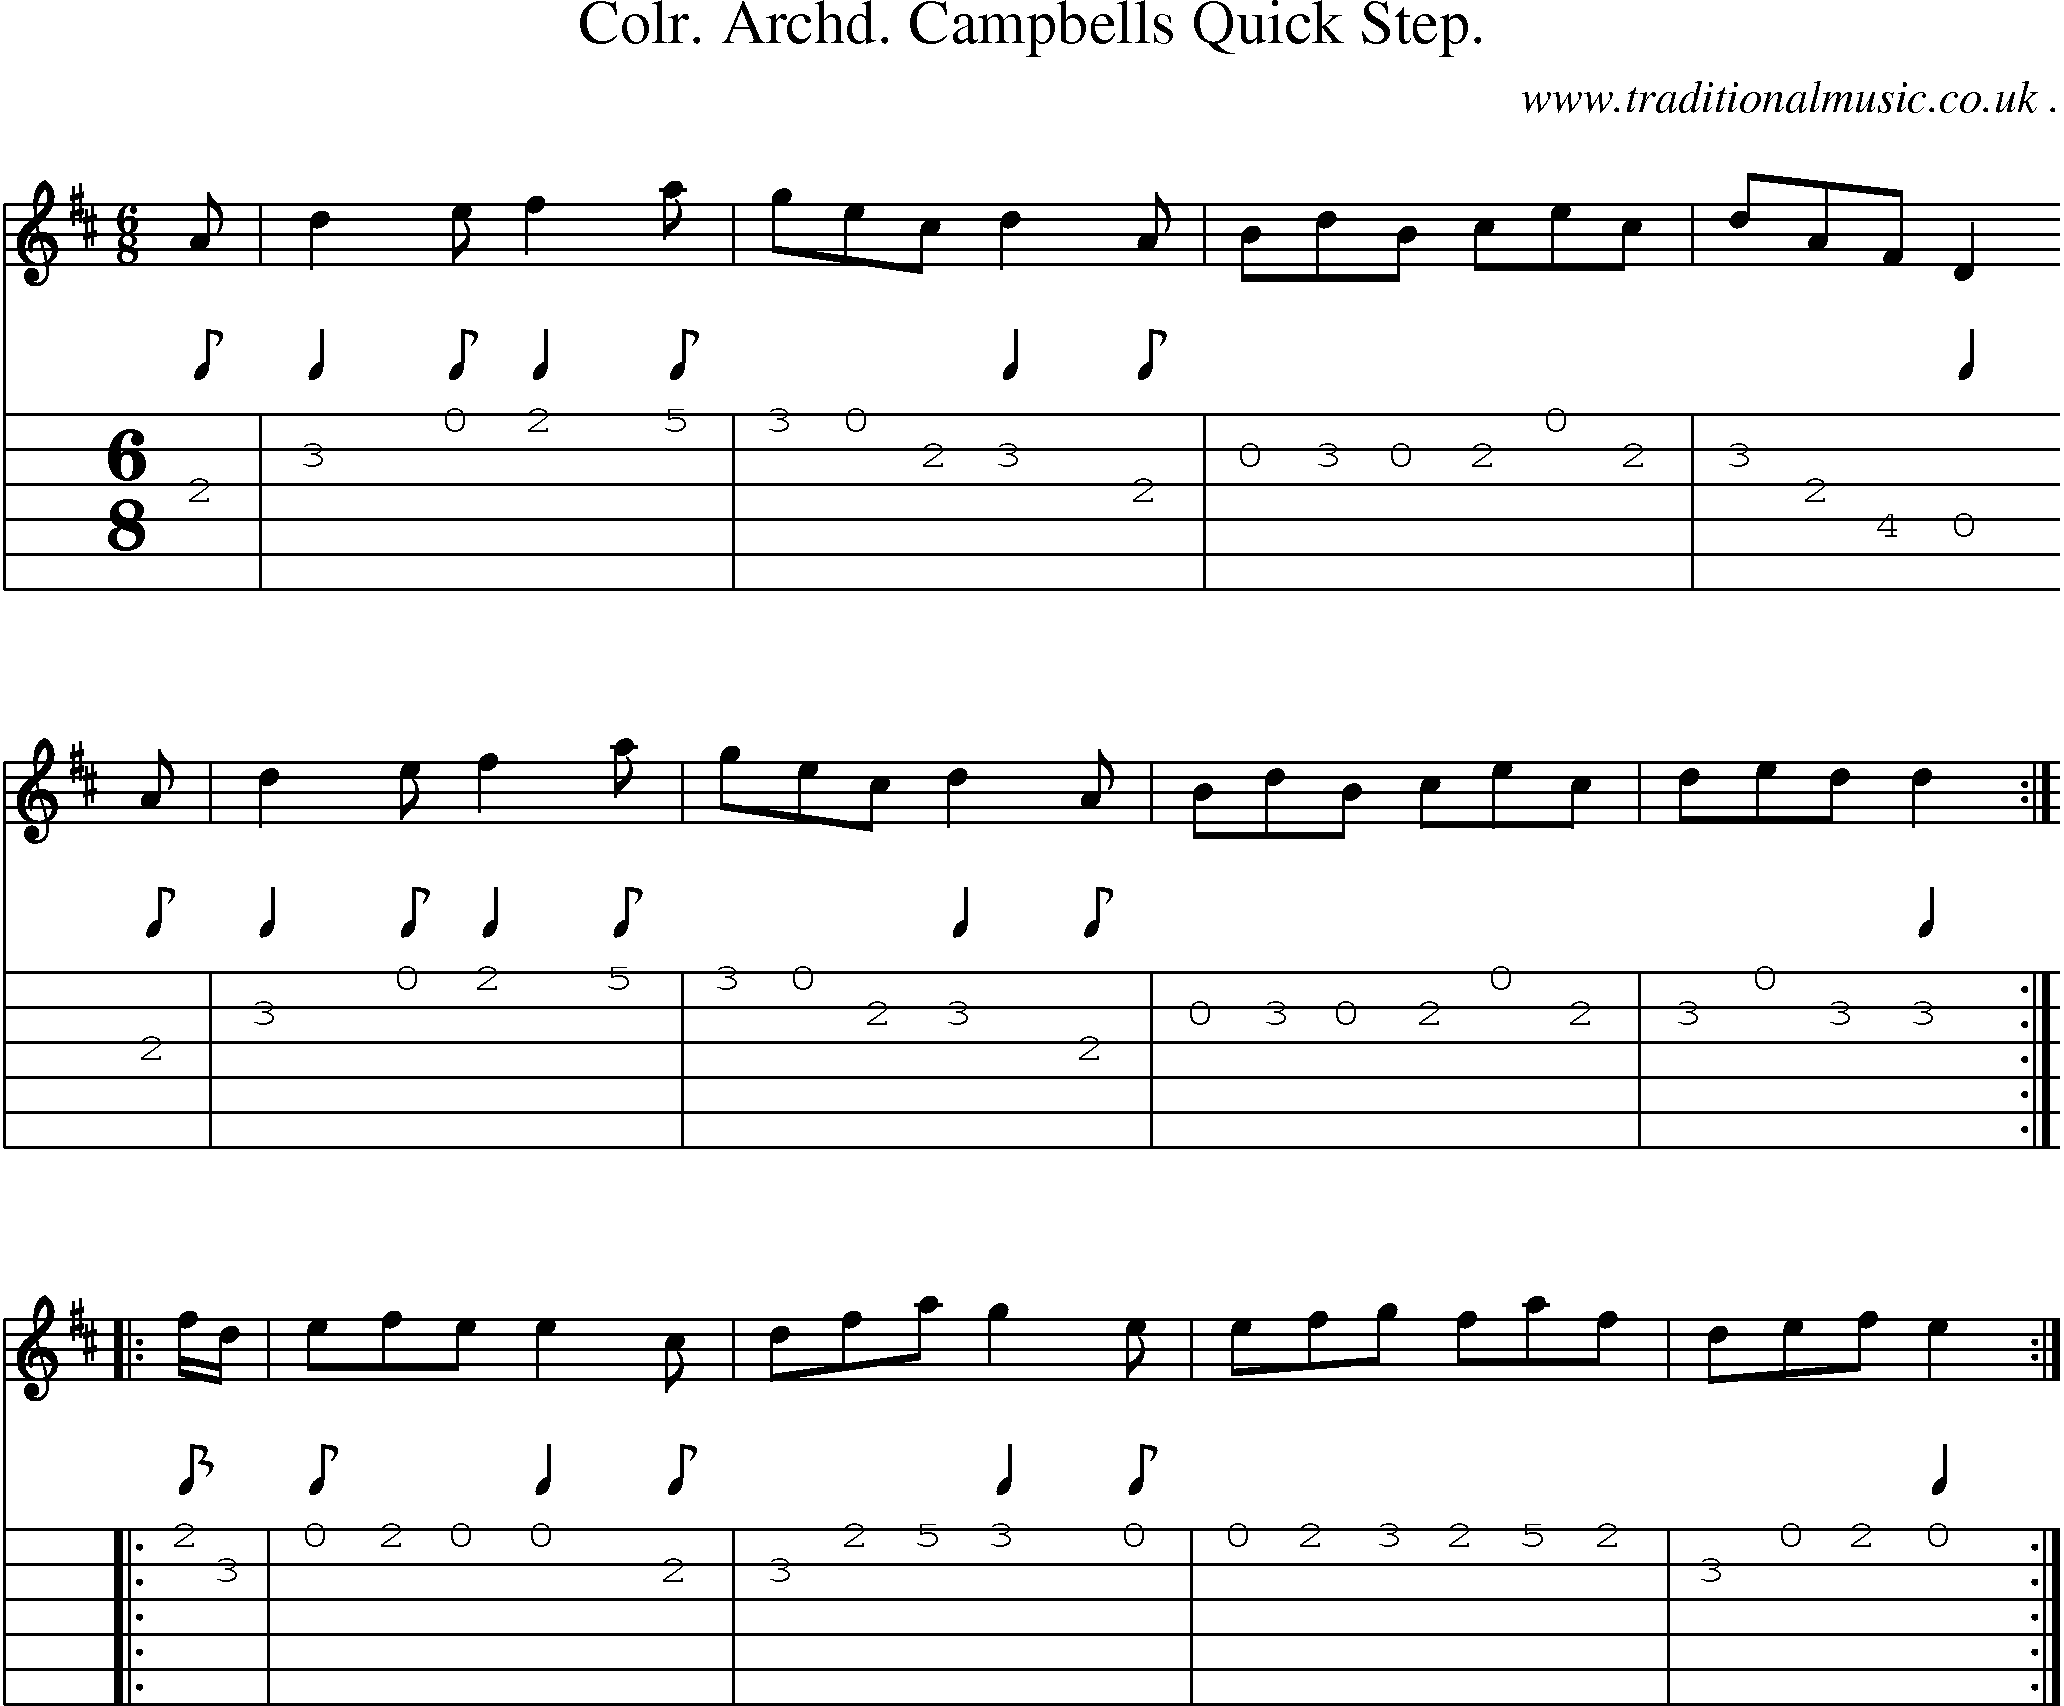 Sheet-Music and Guitar Tabs for Colr Archd Campbells Quick Step